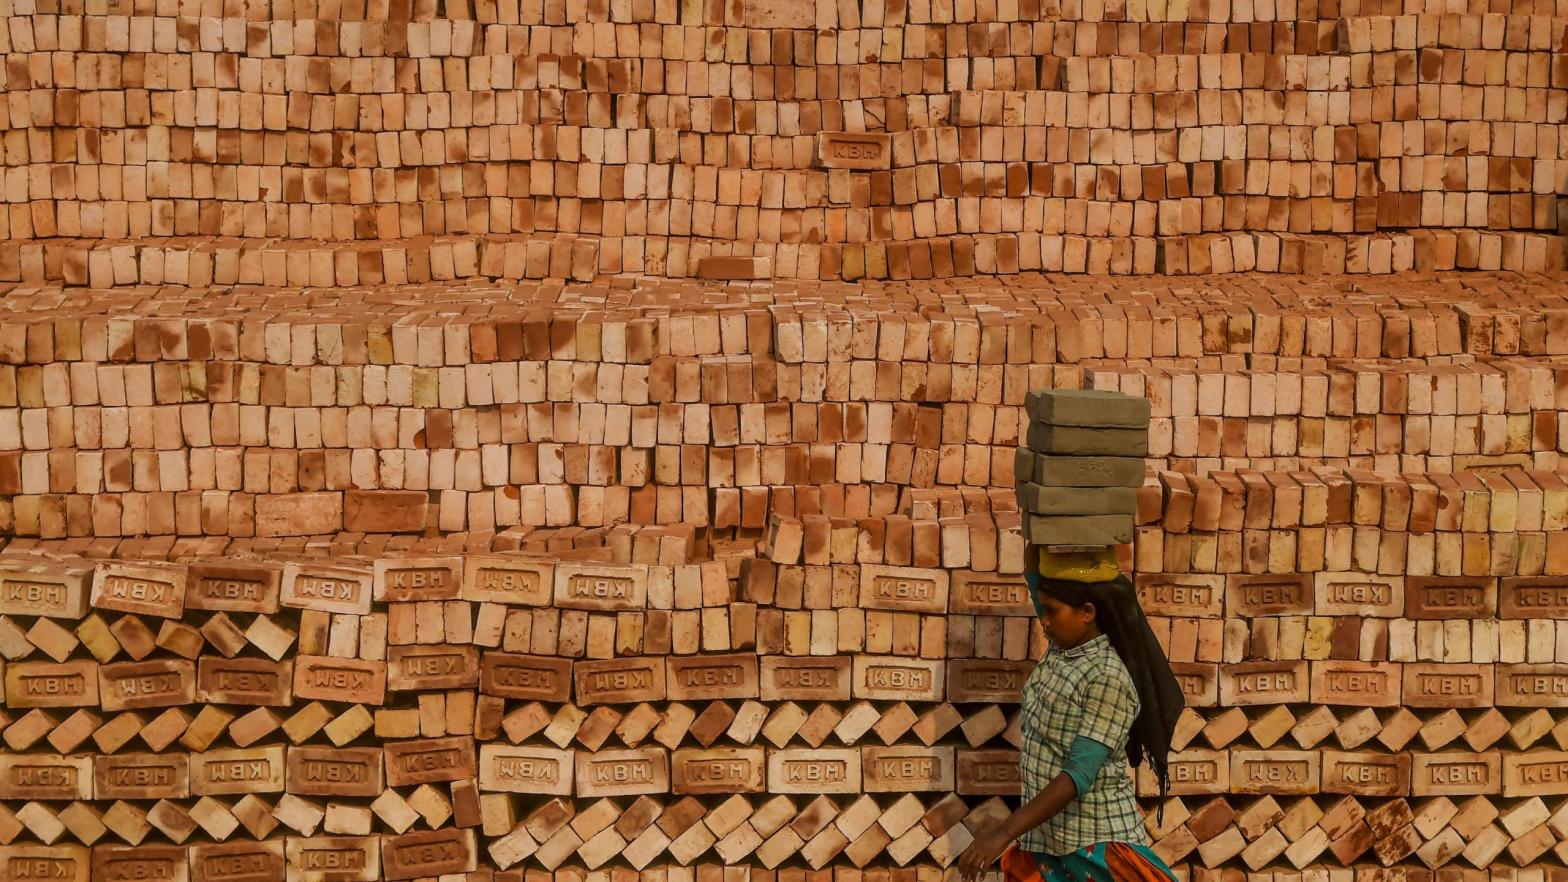 These bricks could power a house someday. (Photo: Dibyangshu Sarkark/AFP, Getty Images)